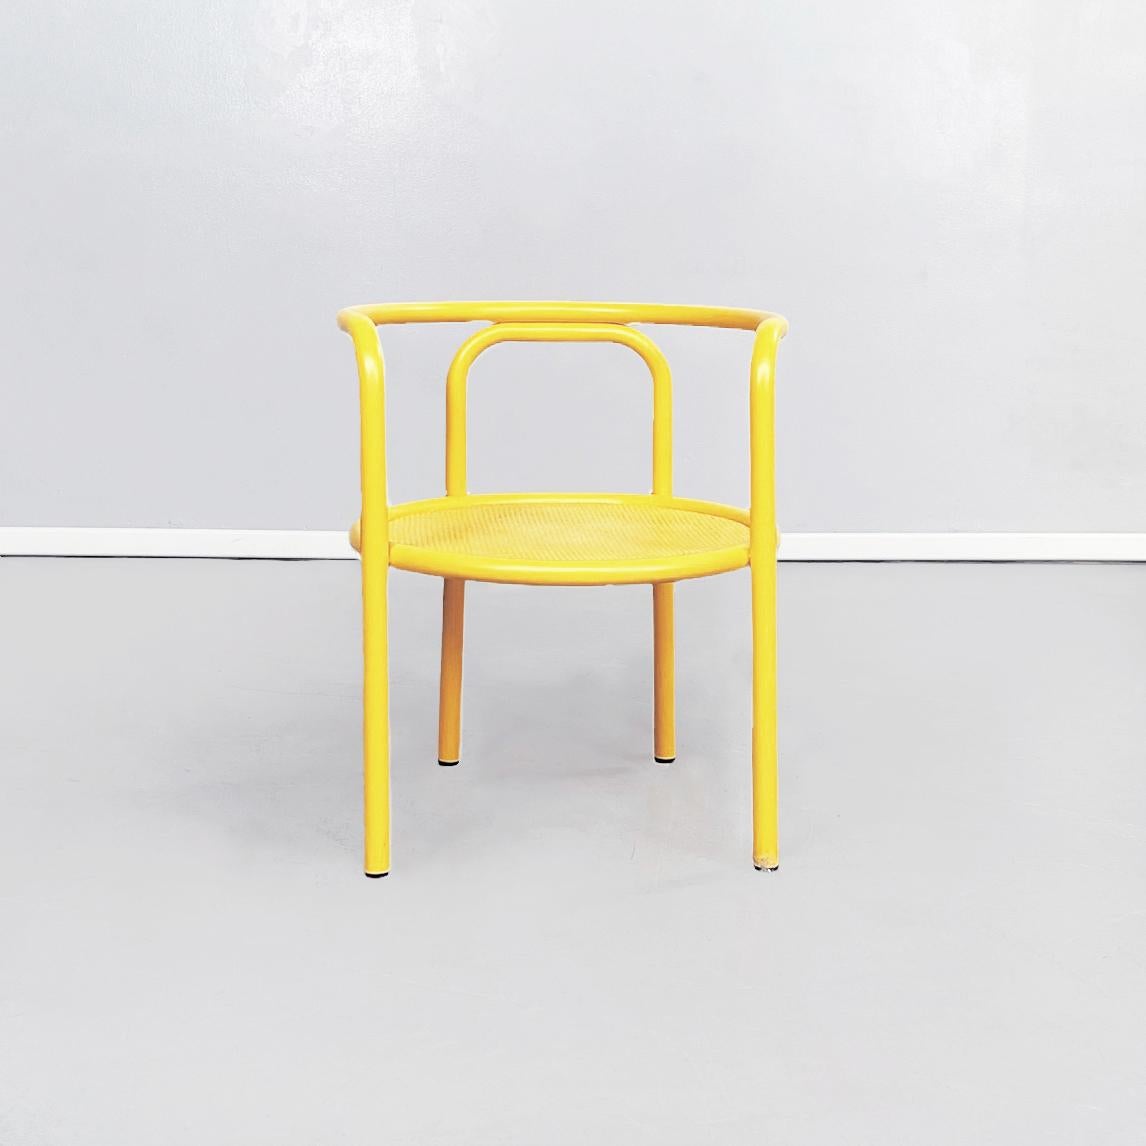 Italian mid-century yellow chairs Locus Solus by Gae Aulenti for Poltronova, 1960s
Set of 4 garden chairs from the series Locus Solus in yellow painted metal. The round seat is perforated sheet metal. The structure, which forms the backrest,